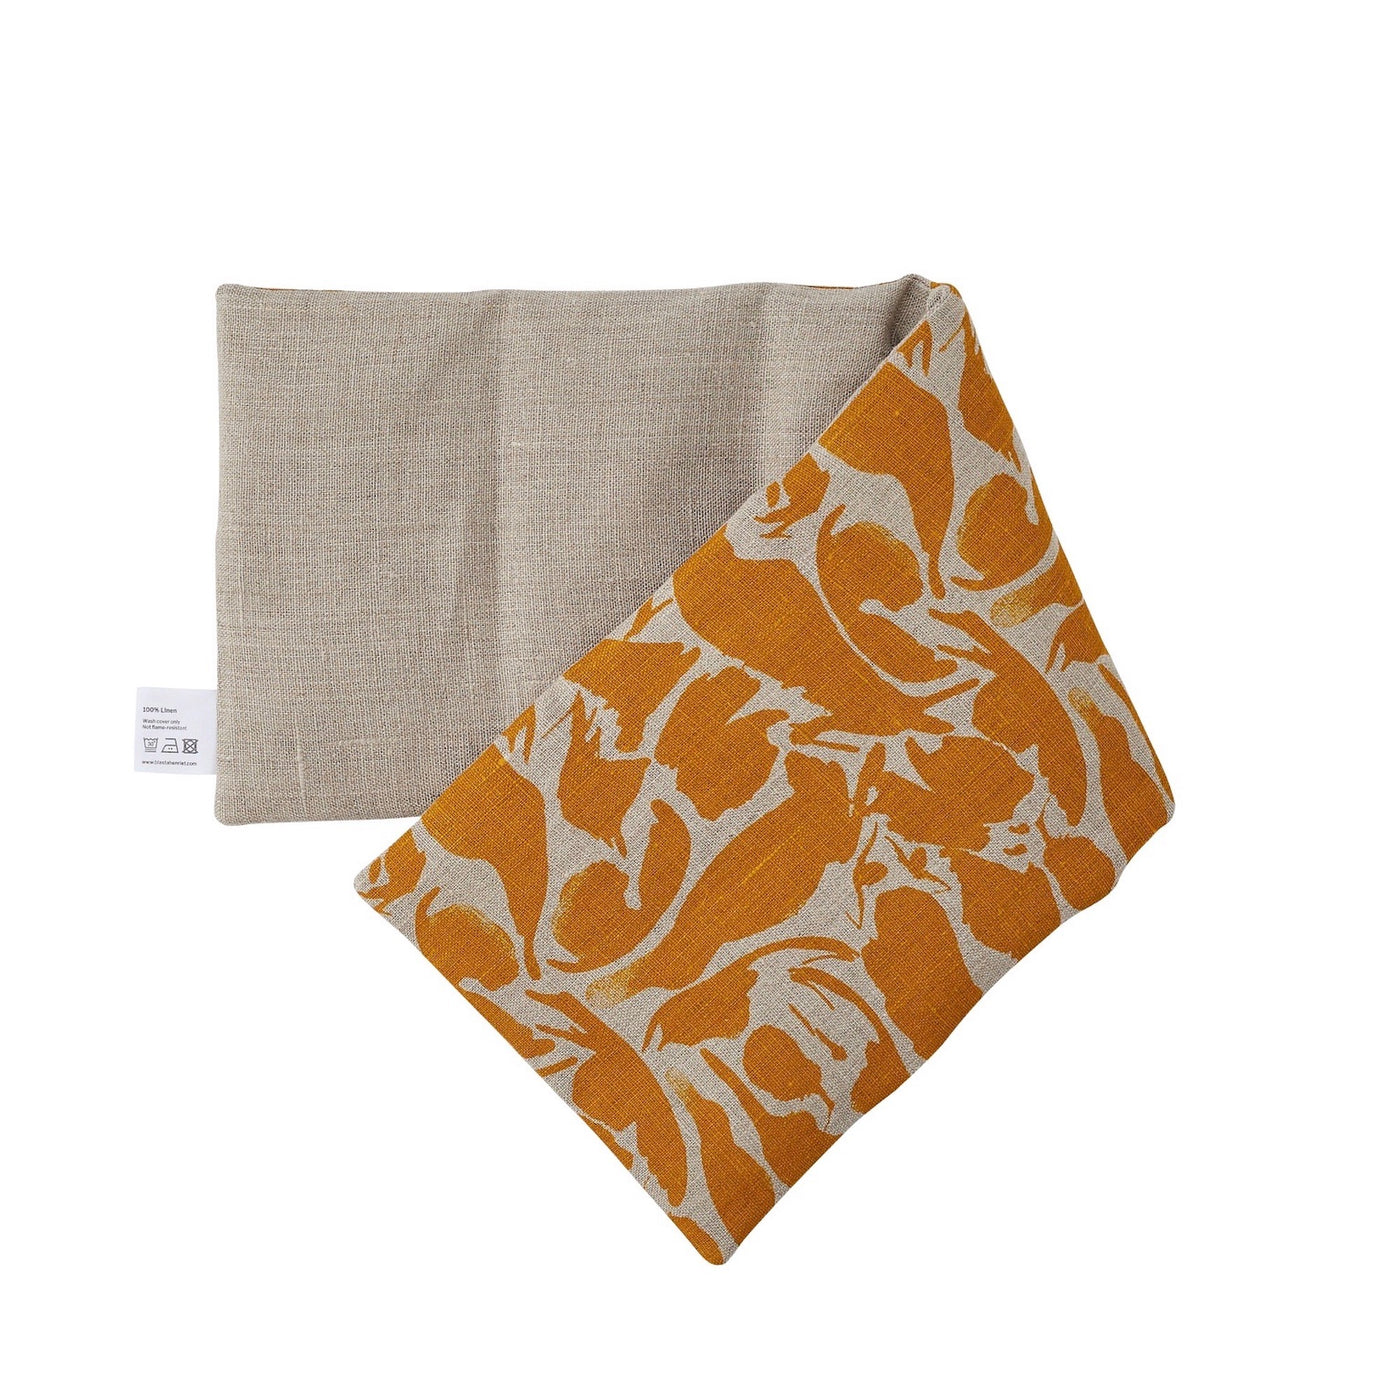 Linen Hot and Cold Wheat Bag - Mustard